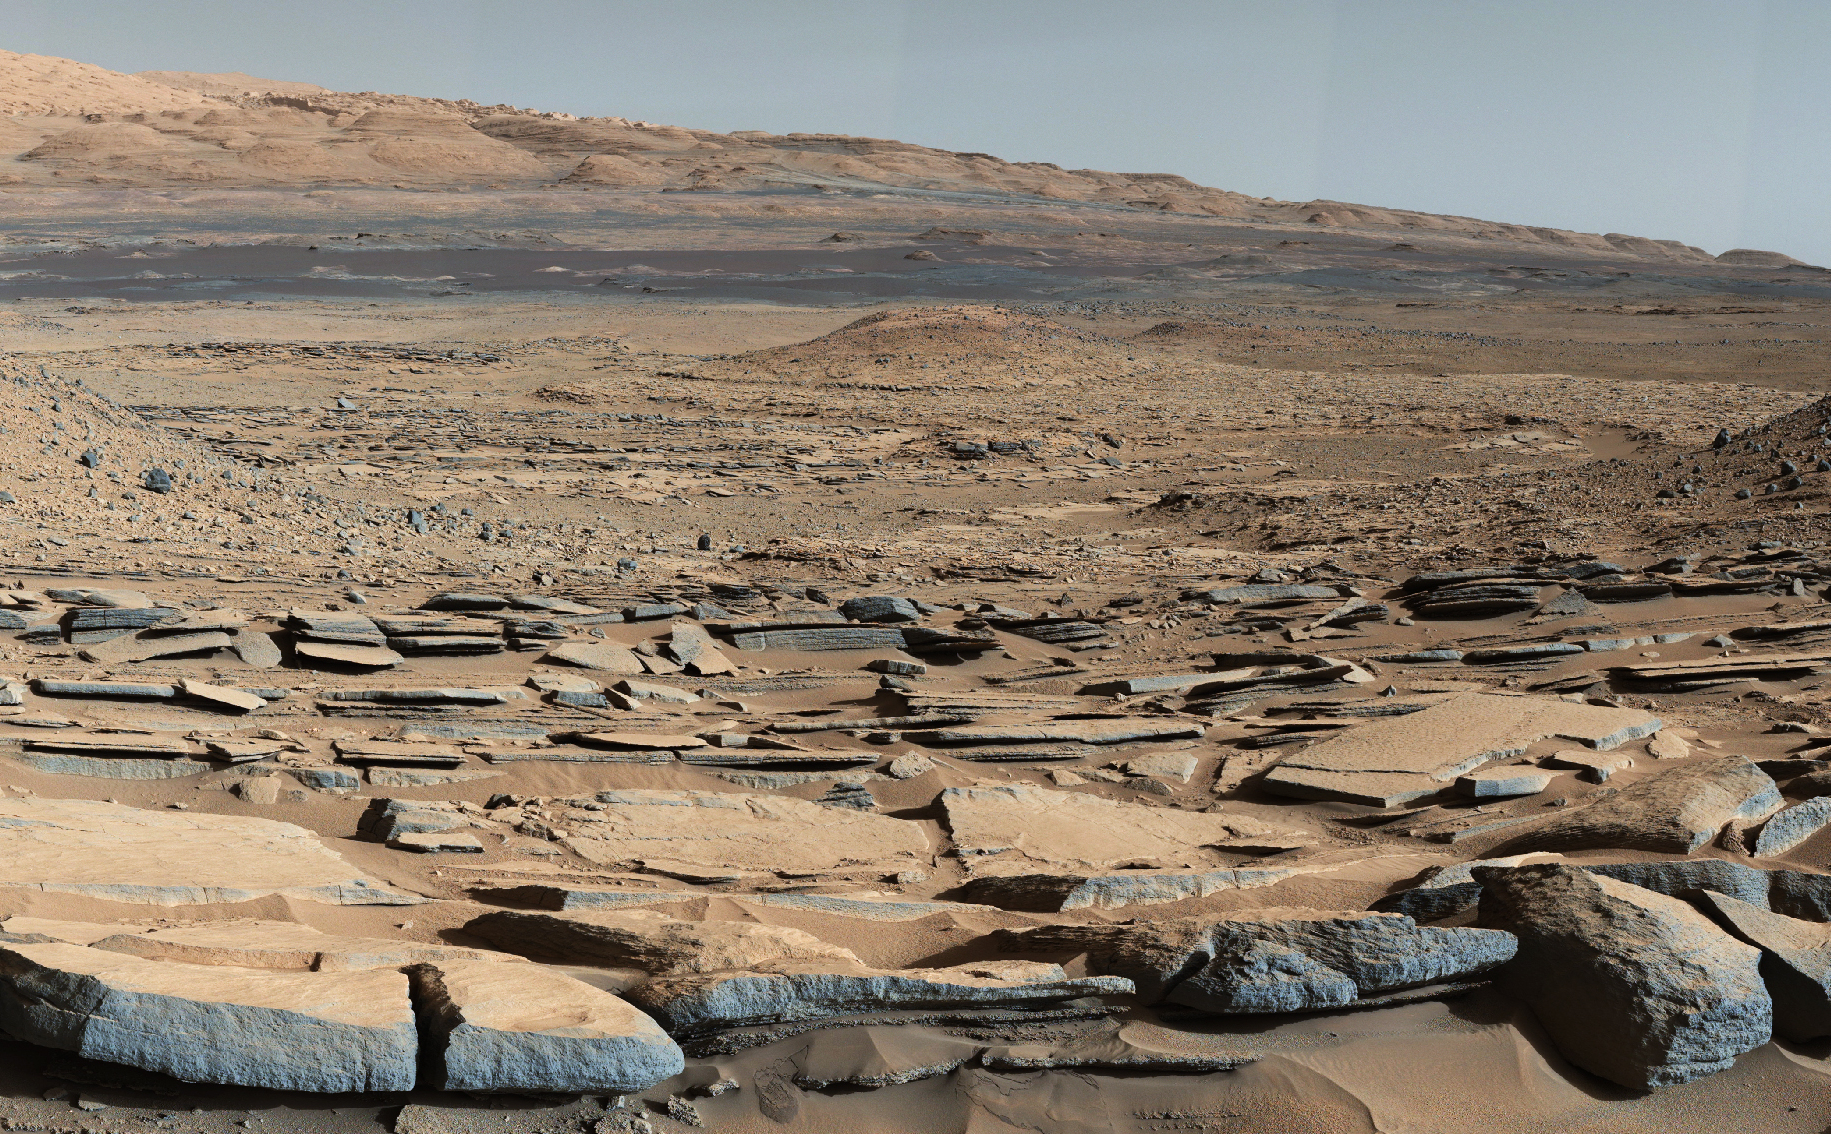 View from the "Kimberley" formation on Mars taken by NASA's Curiosity rover.